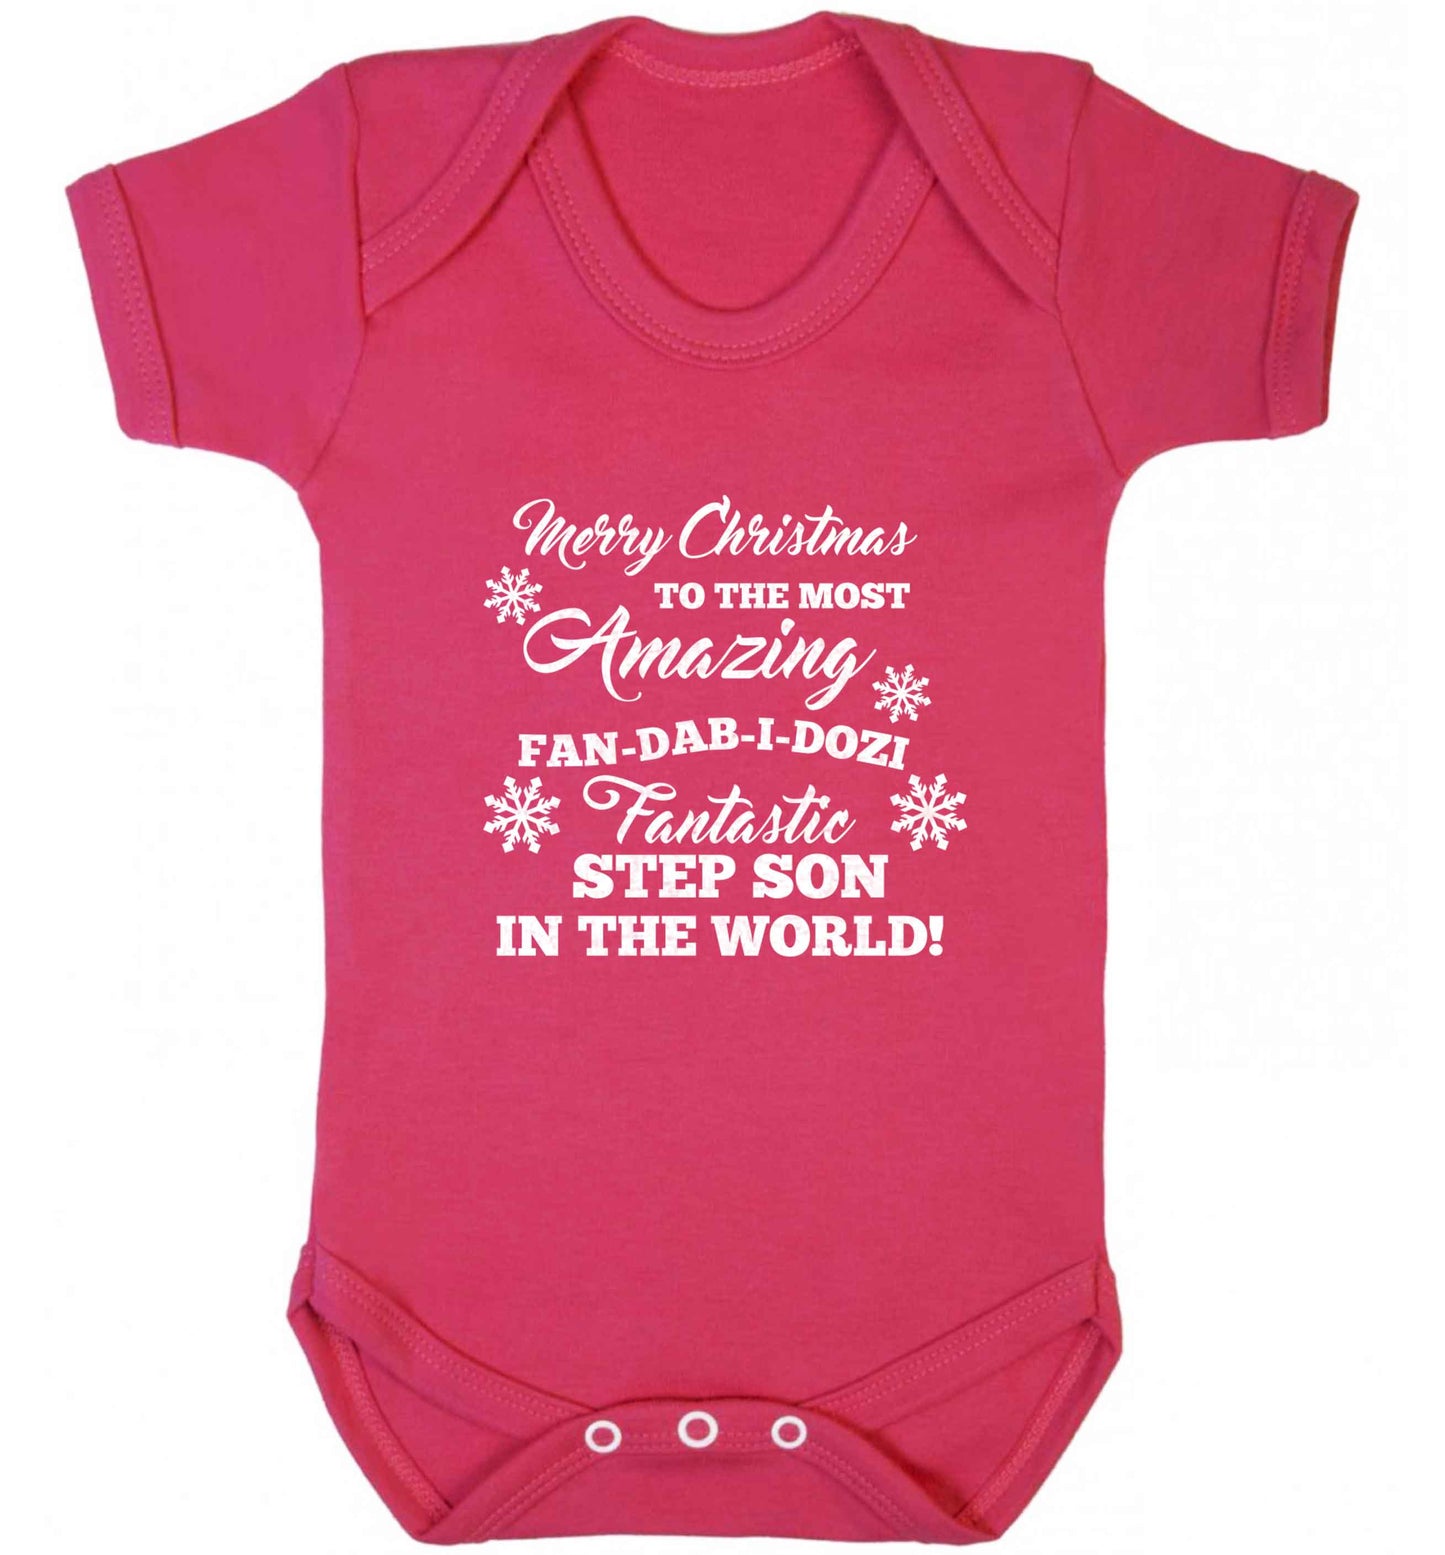 Merry Christmas to the most amazing fan-dab-i-dozi fantasic Step Son in the world baby vest dark pink 18-24 months